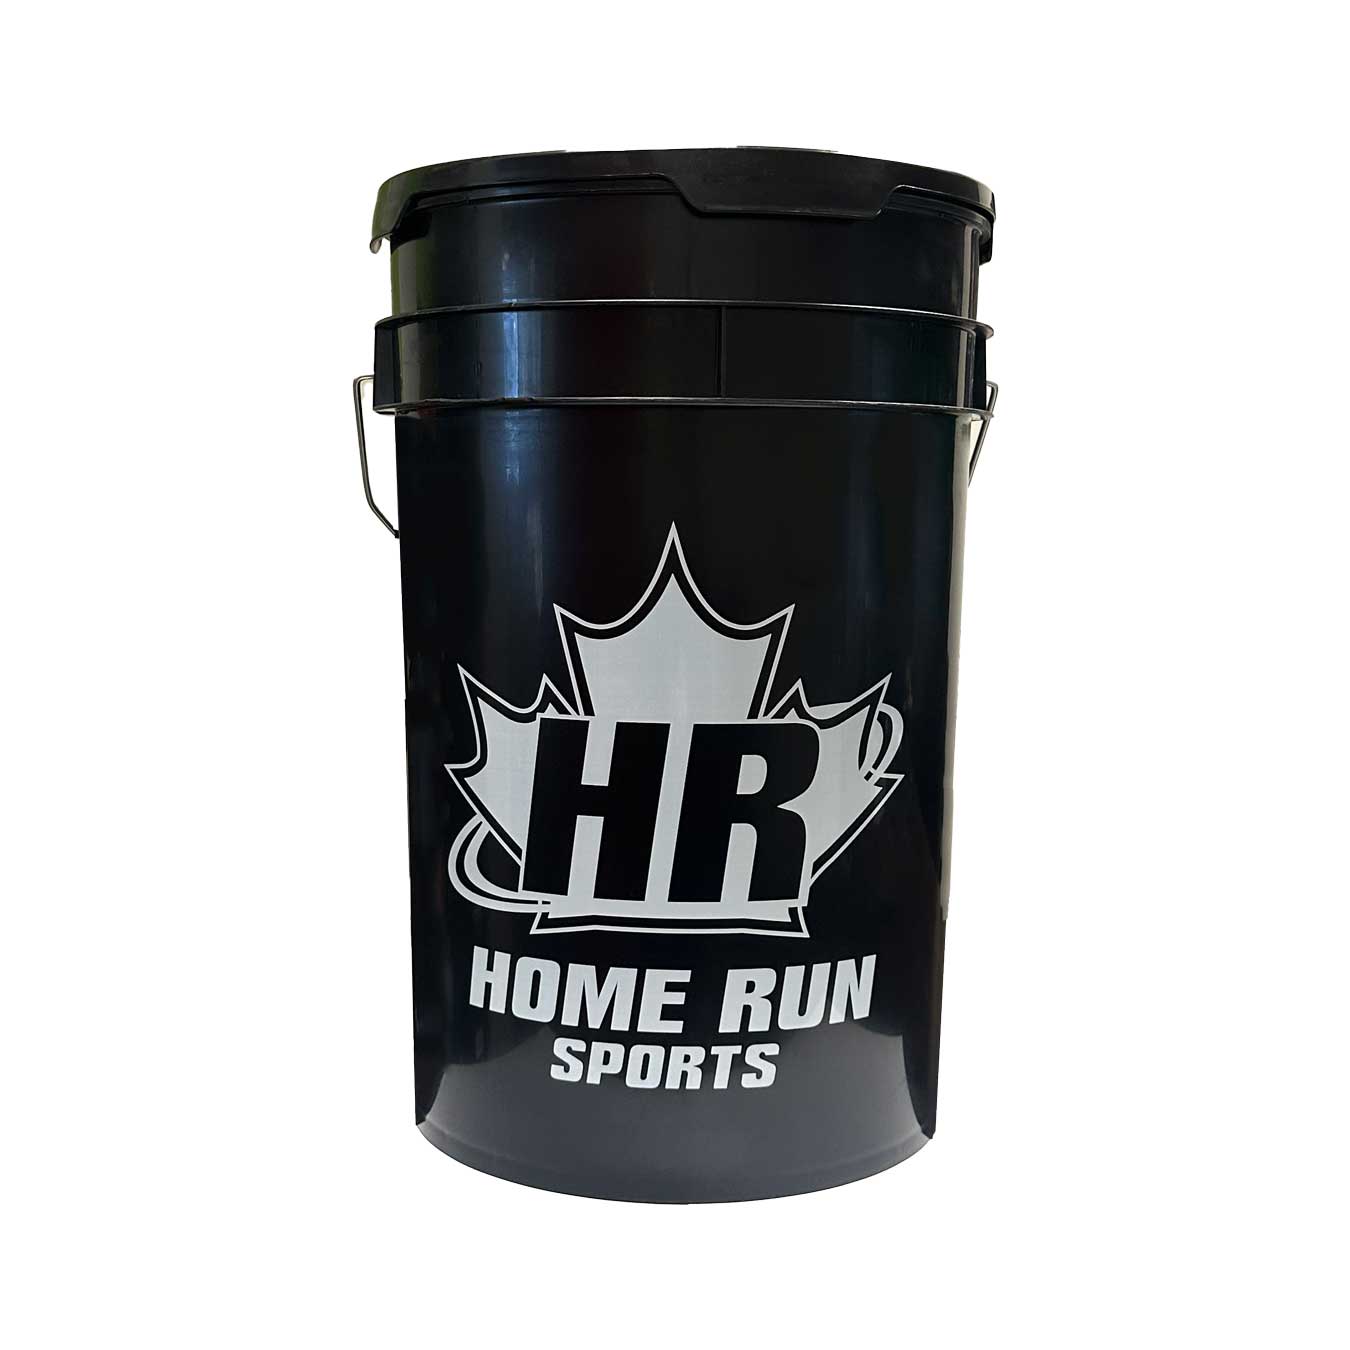 Home Run Sports Bucket with 2 dz 12" Red Dot Combo